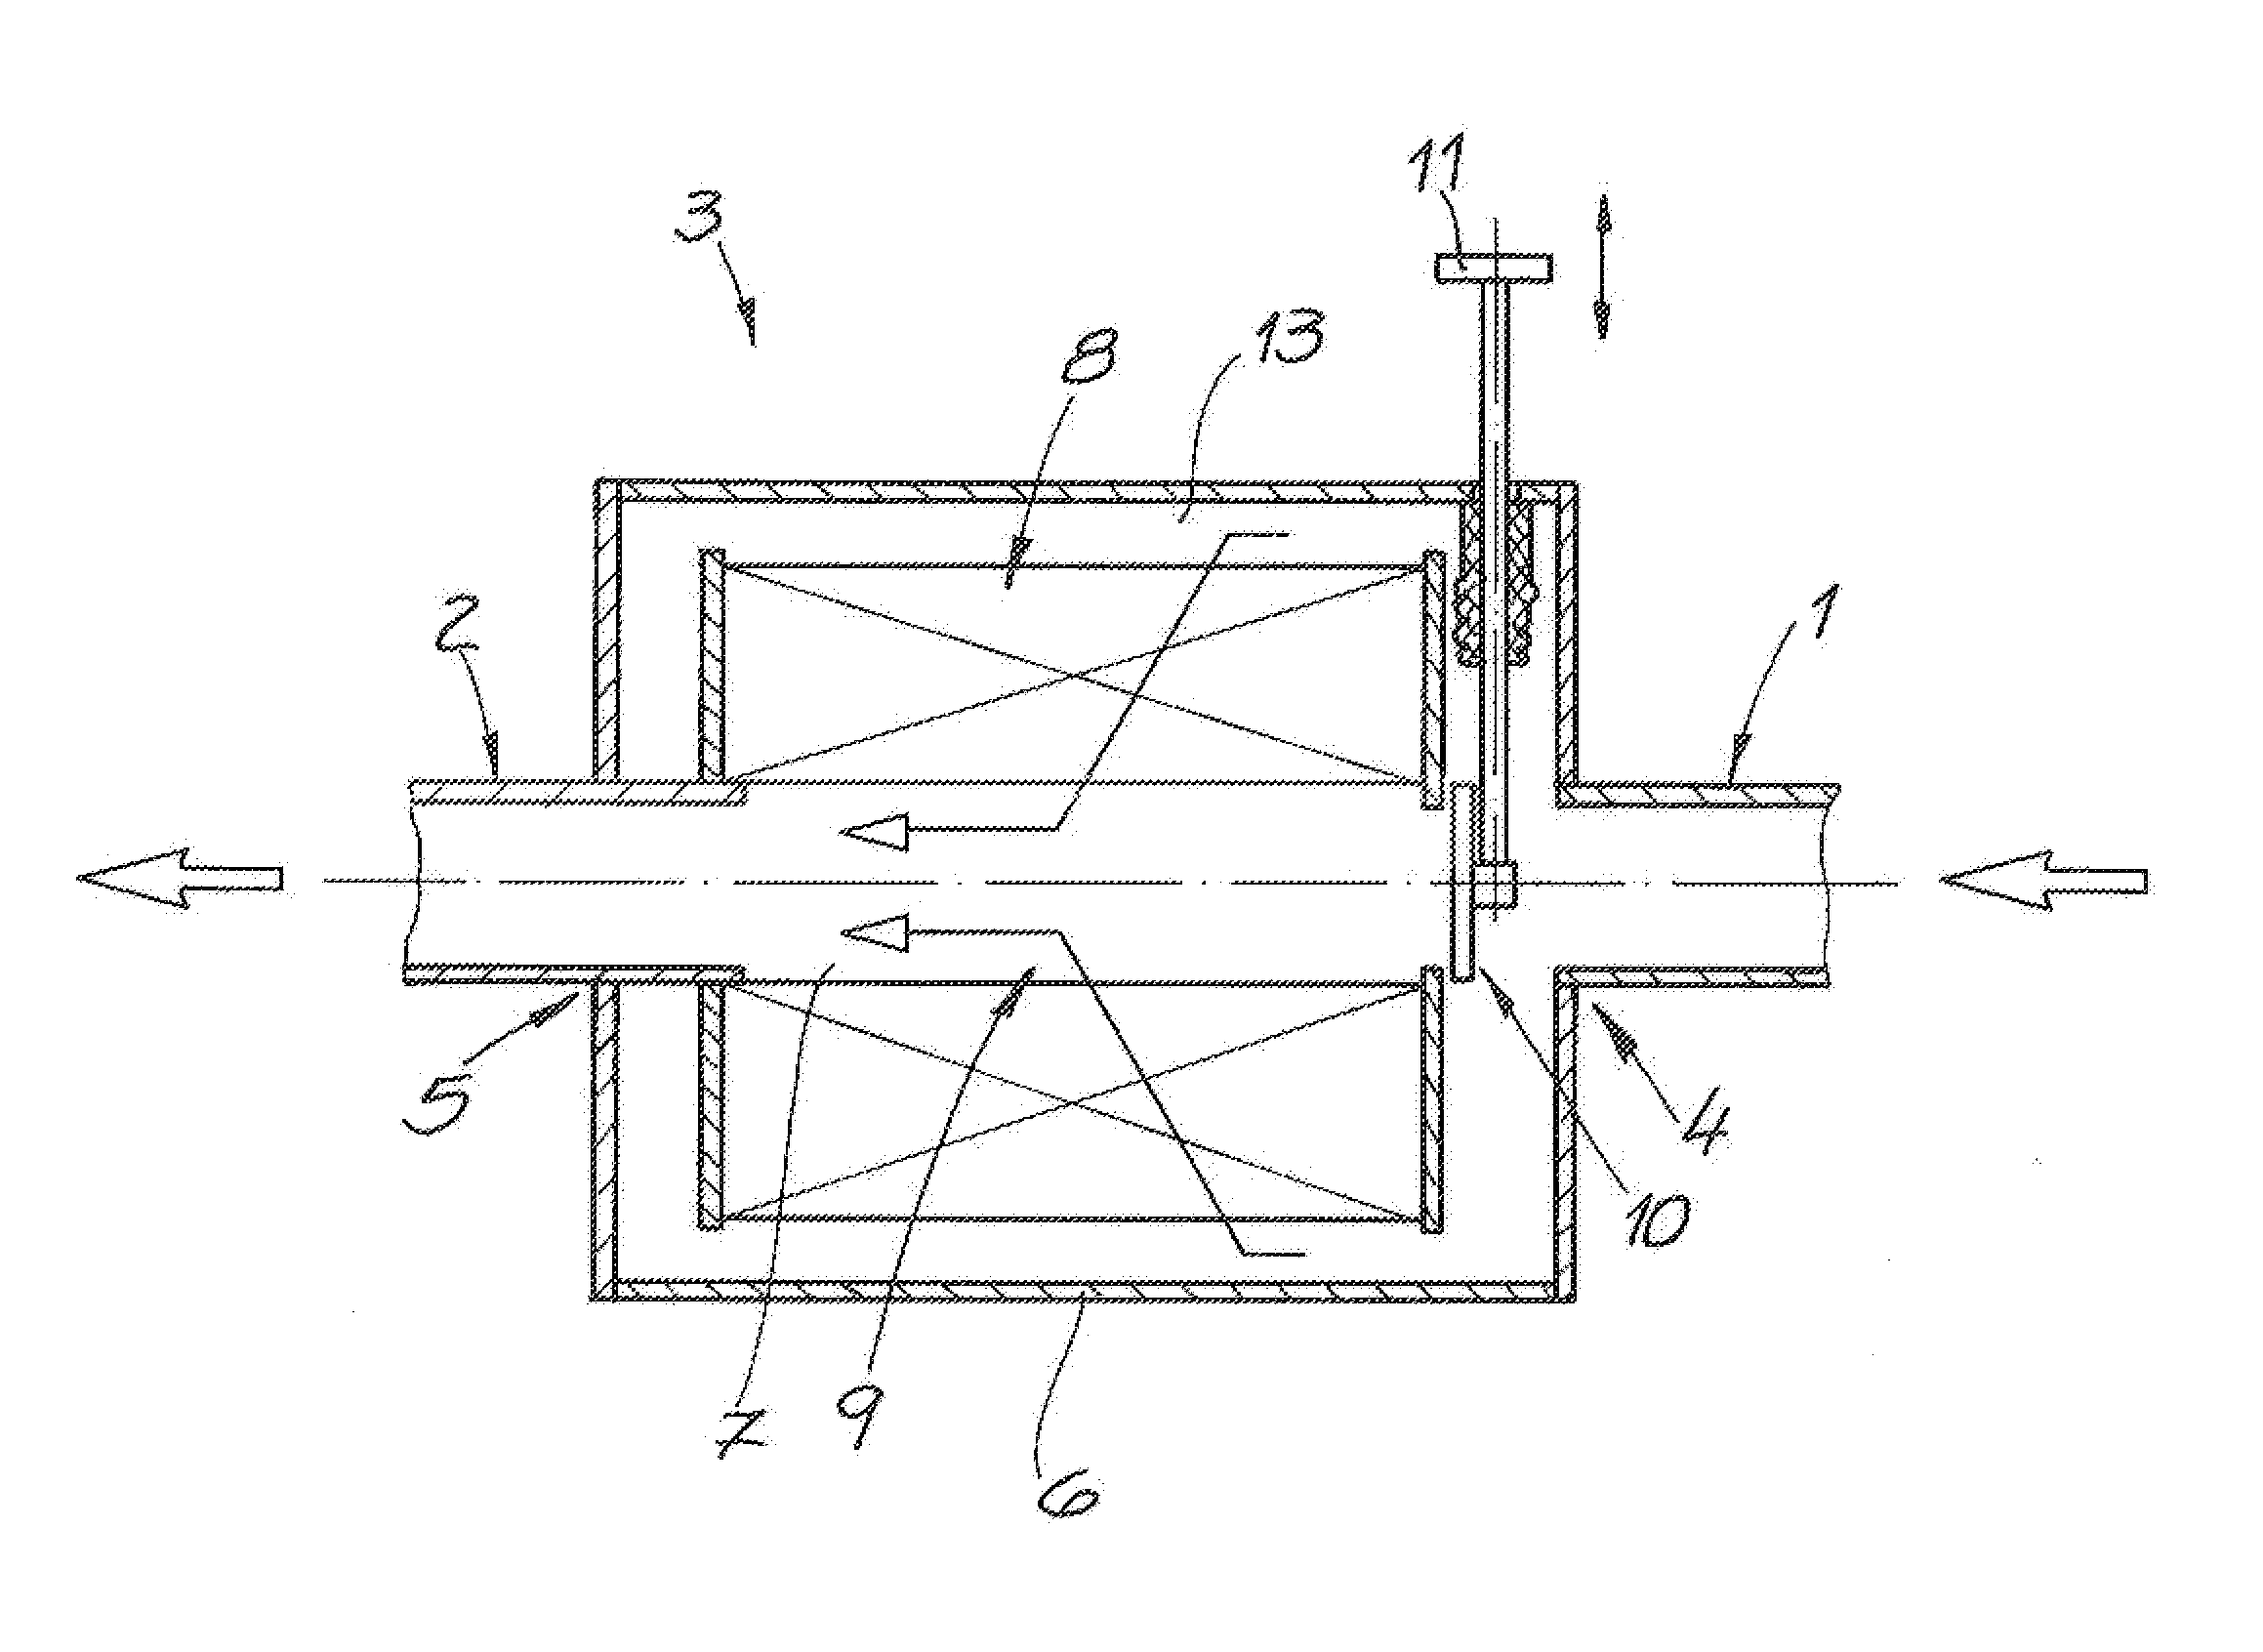 Fuel line assembly and method for operating a fuel line assembly